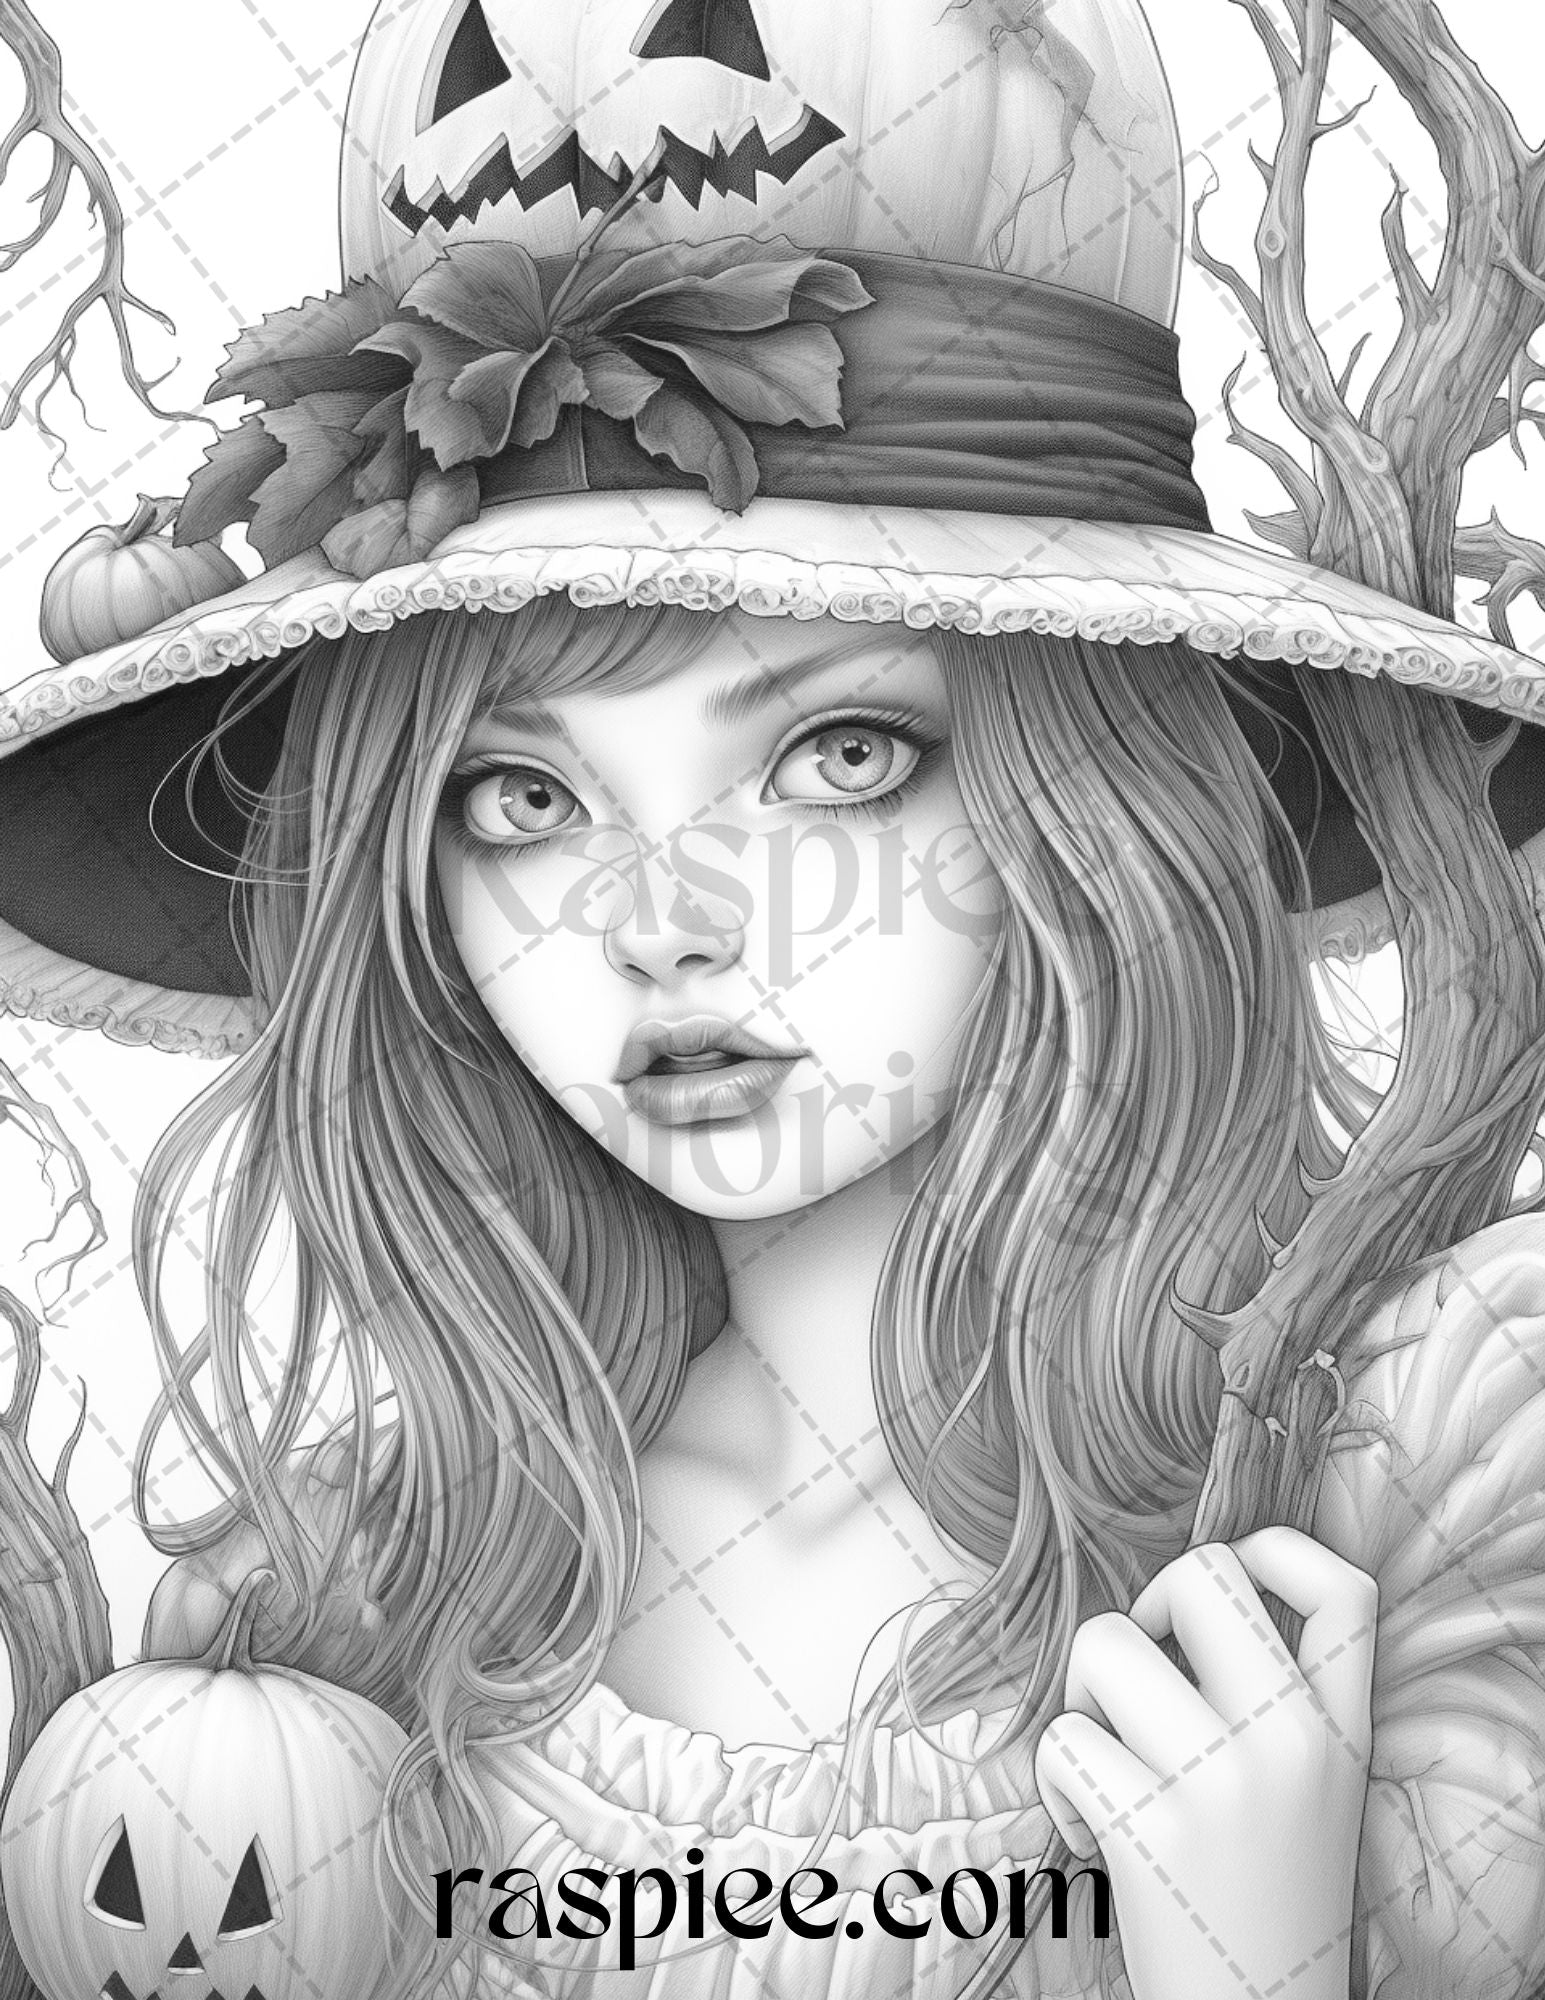 70 Beauty Witches Grayscale Coloring Pages - Instant Download - Printa